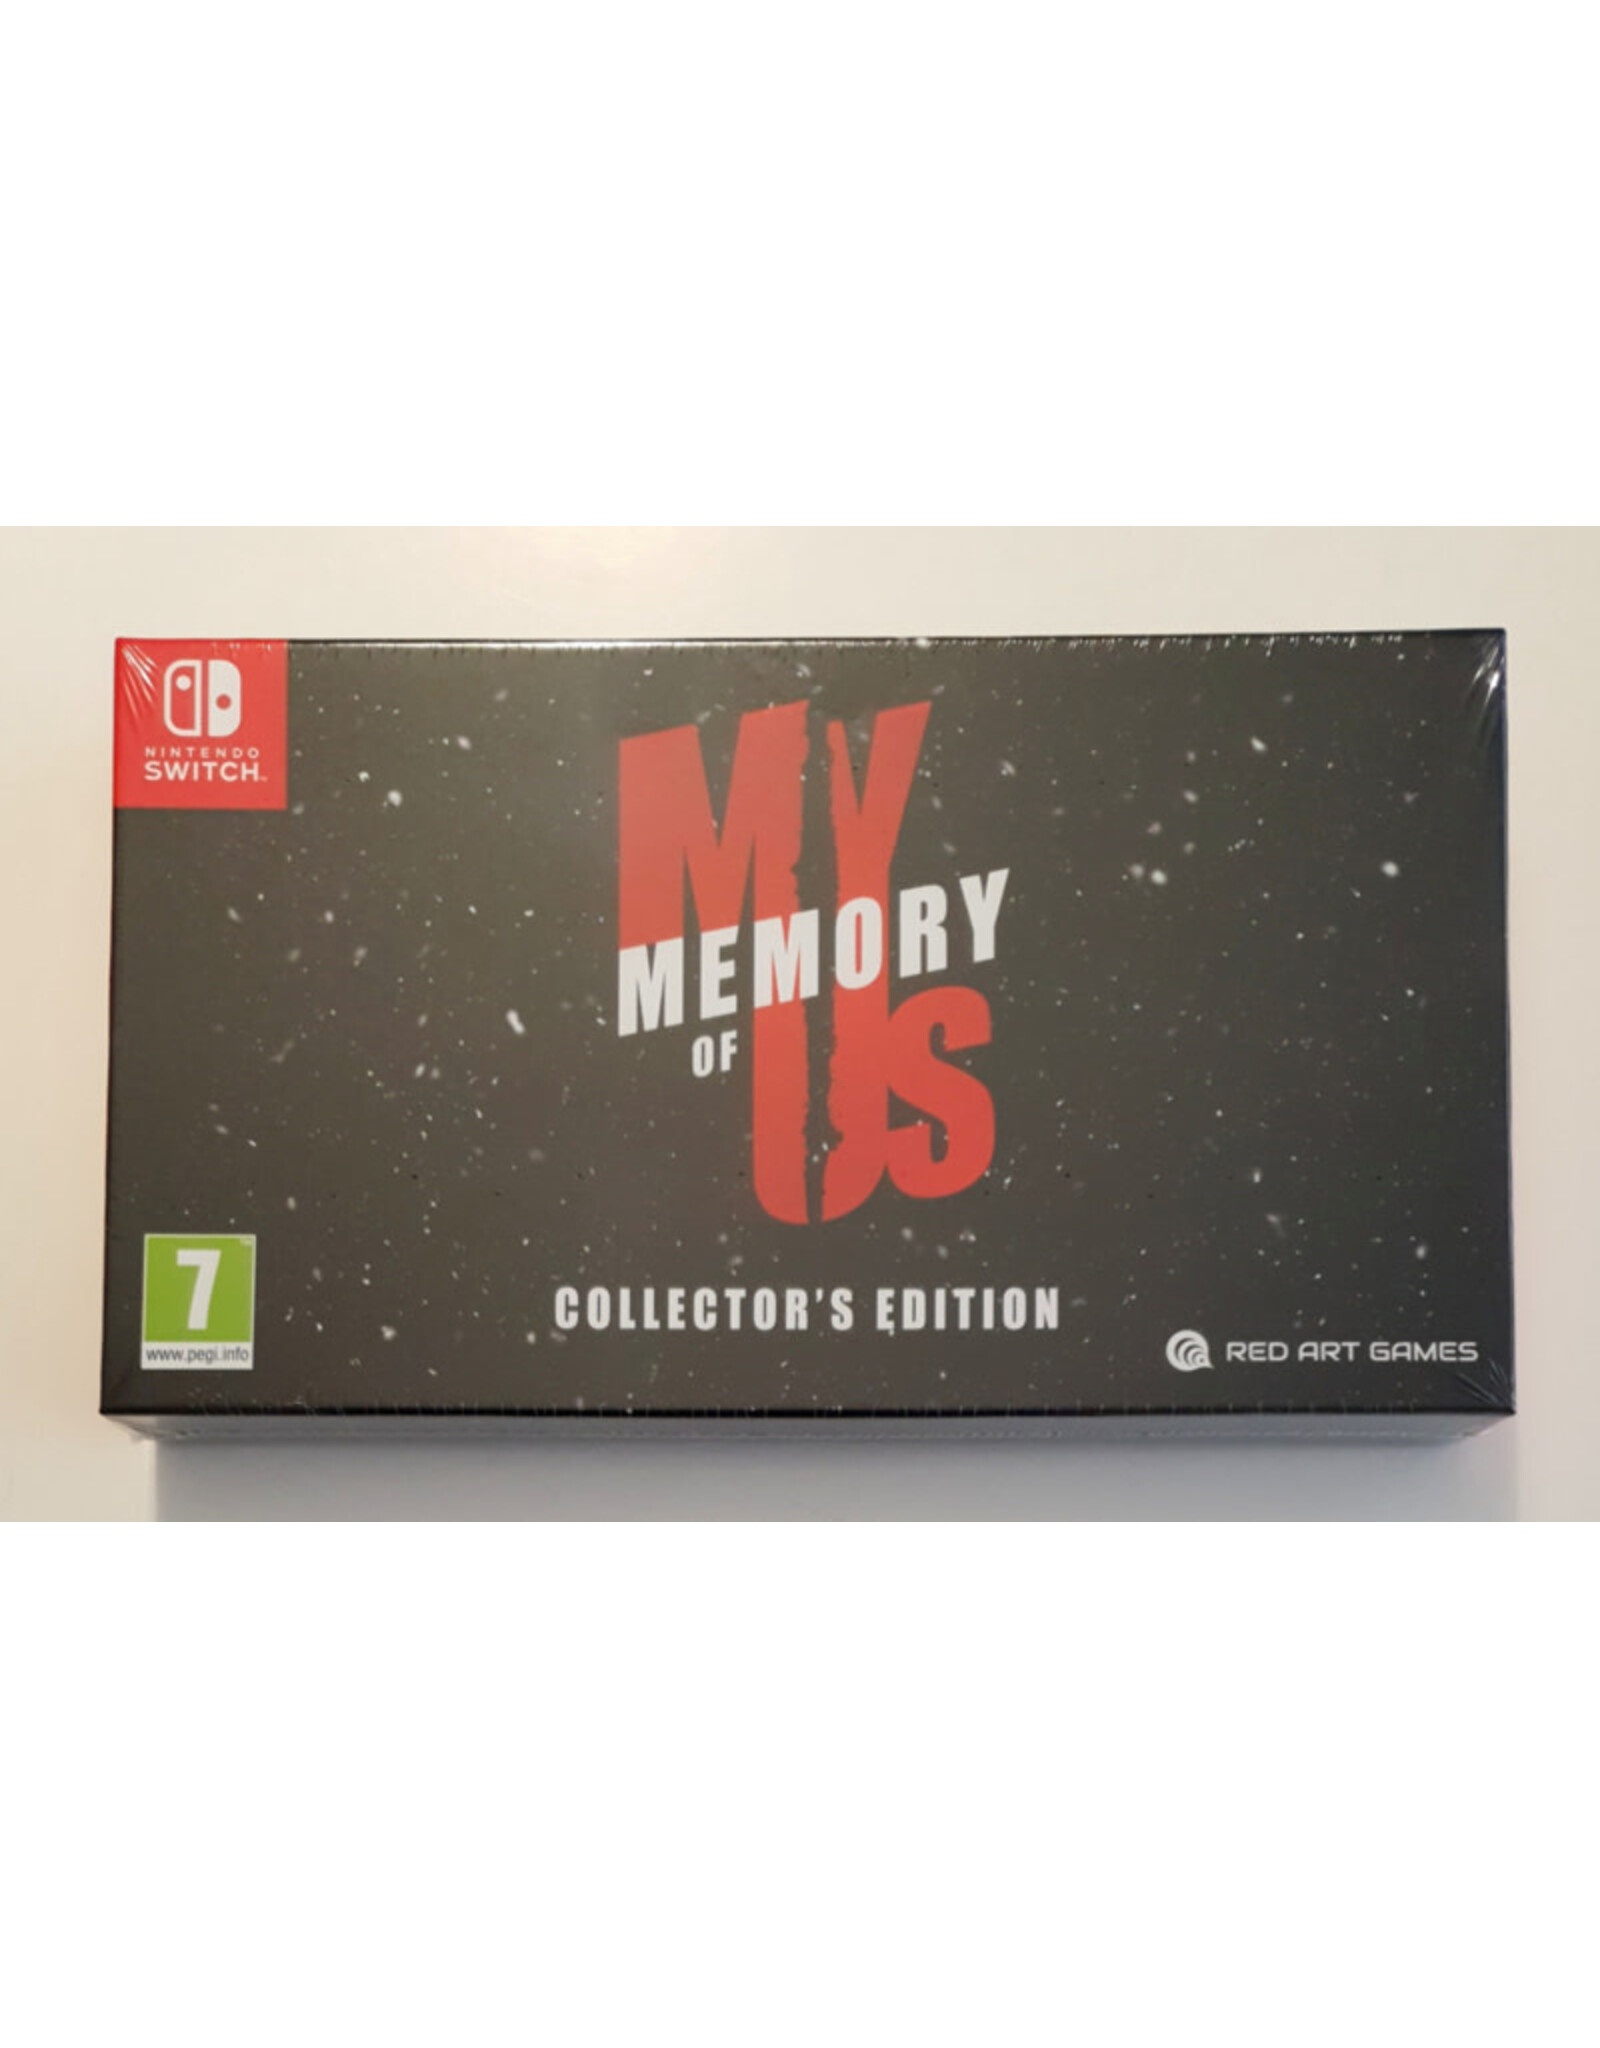 Nintendo Switch My Memory of Us Collection's Edition (Damaged Outer Shrinkwrap, PAL Import)